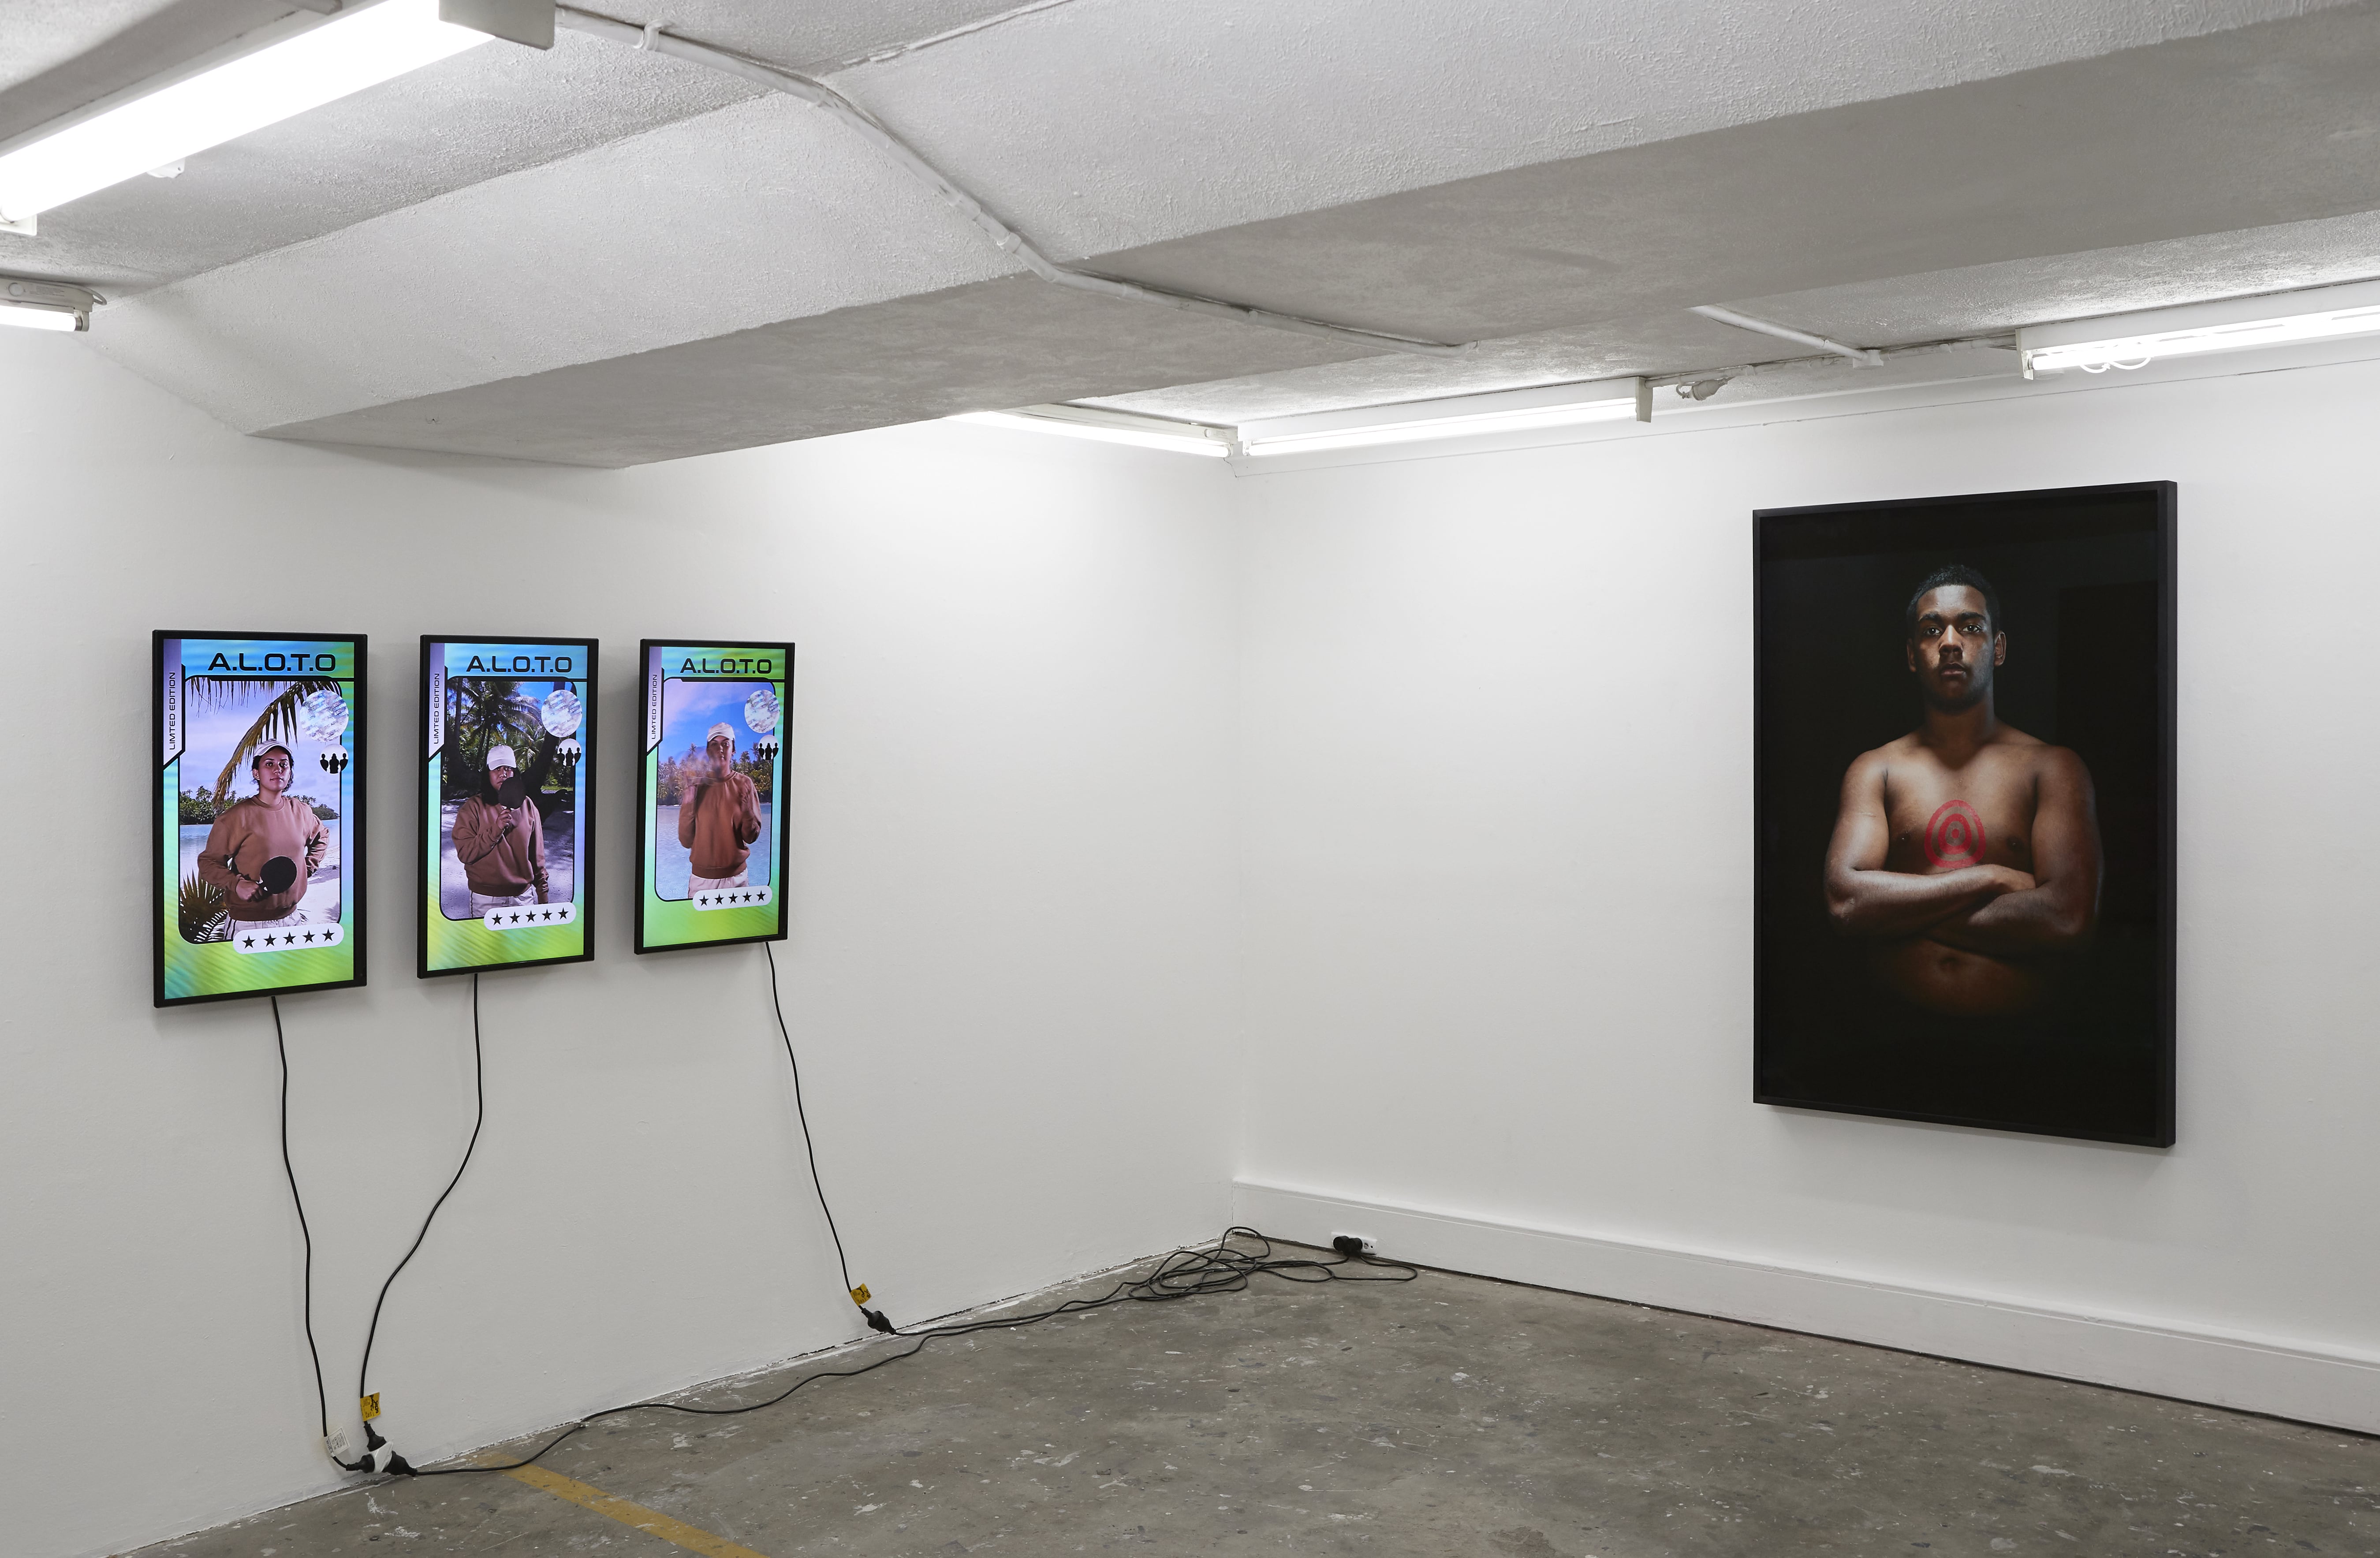 Image 01: Installation view of Get To Work (Tracy Quan, Georgia Taia and Paris Taia); a.l.o.t.o (a league of their own) 2017, three-channel digital video & sound; Tony Albert *Brother (Our Present)* 2013, pigment print on paper 150x100cm, courtesy the artist and Sullivan+Strumpf. Photo credit: Zan Wimberley.